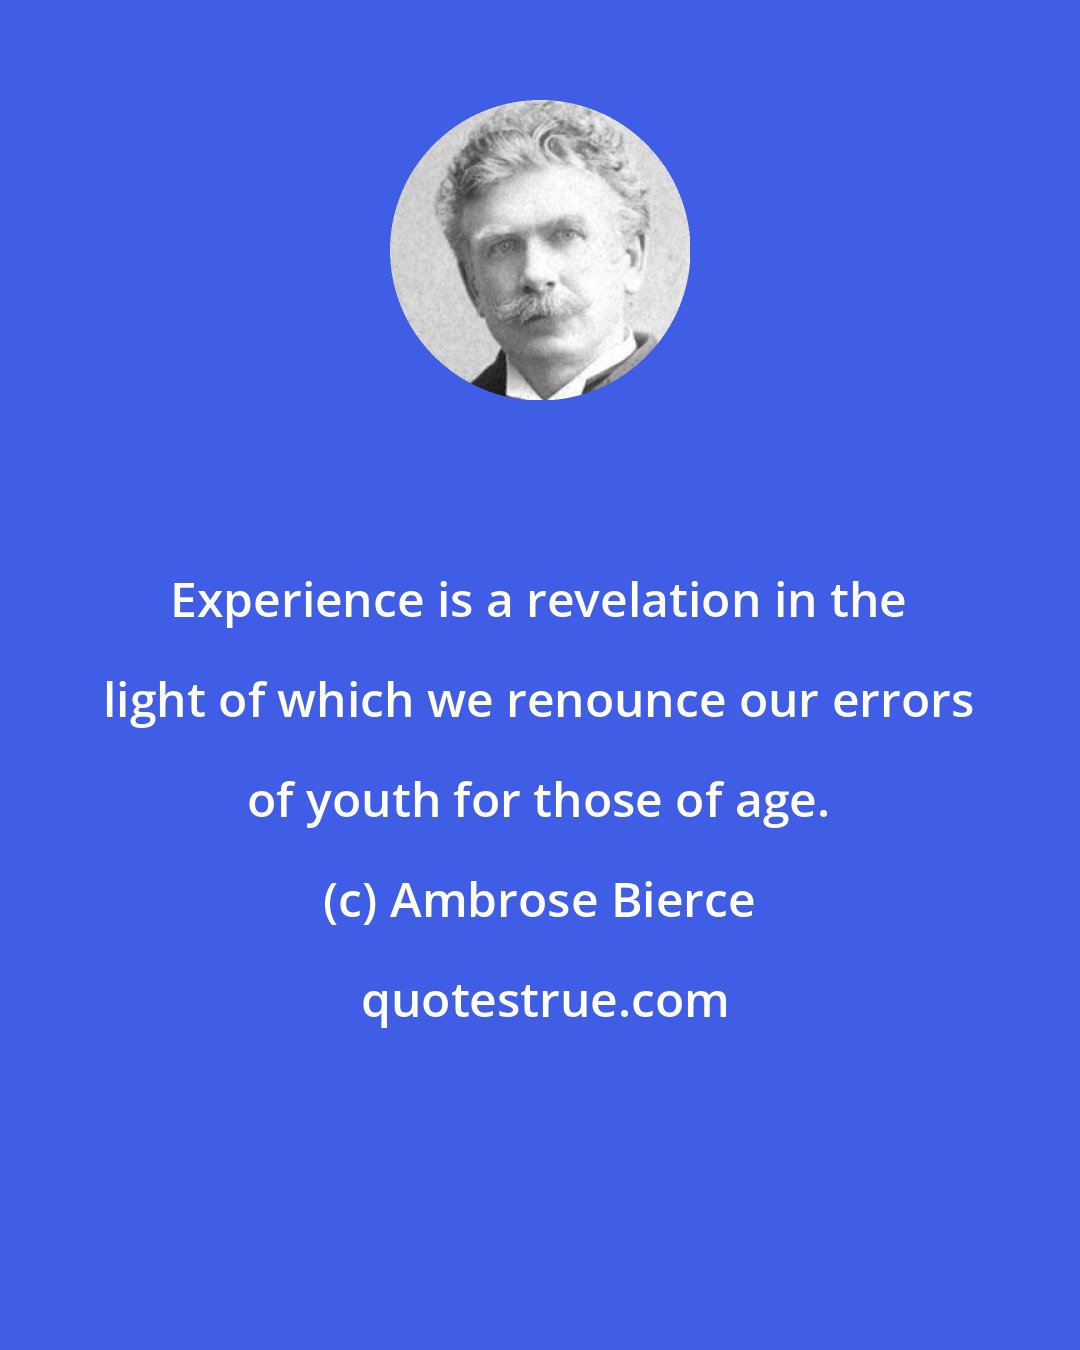 Ambrose Bierce: Experience is a revelation in the light of which we renounce our errors of youth for those of age.